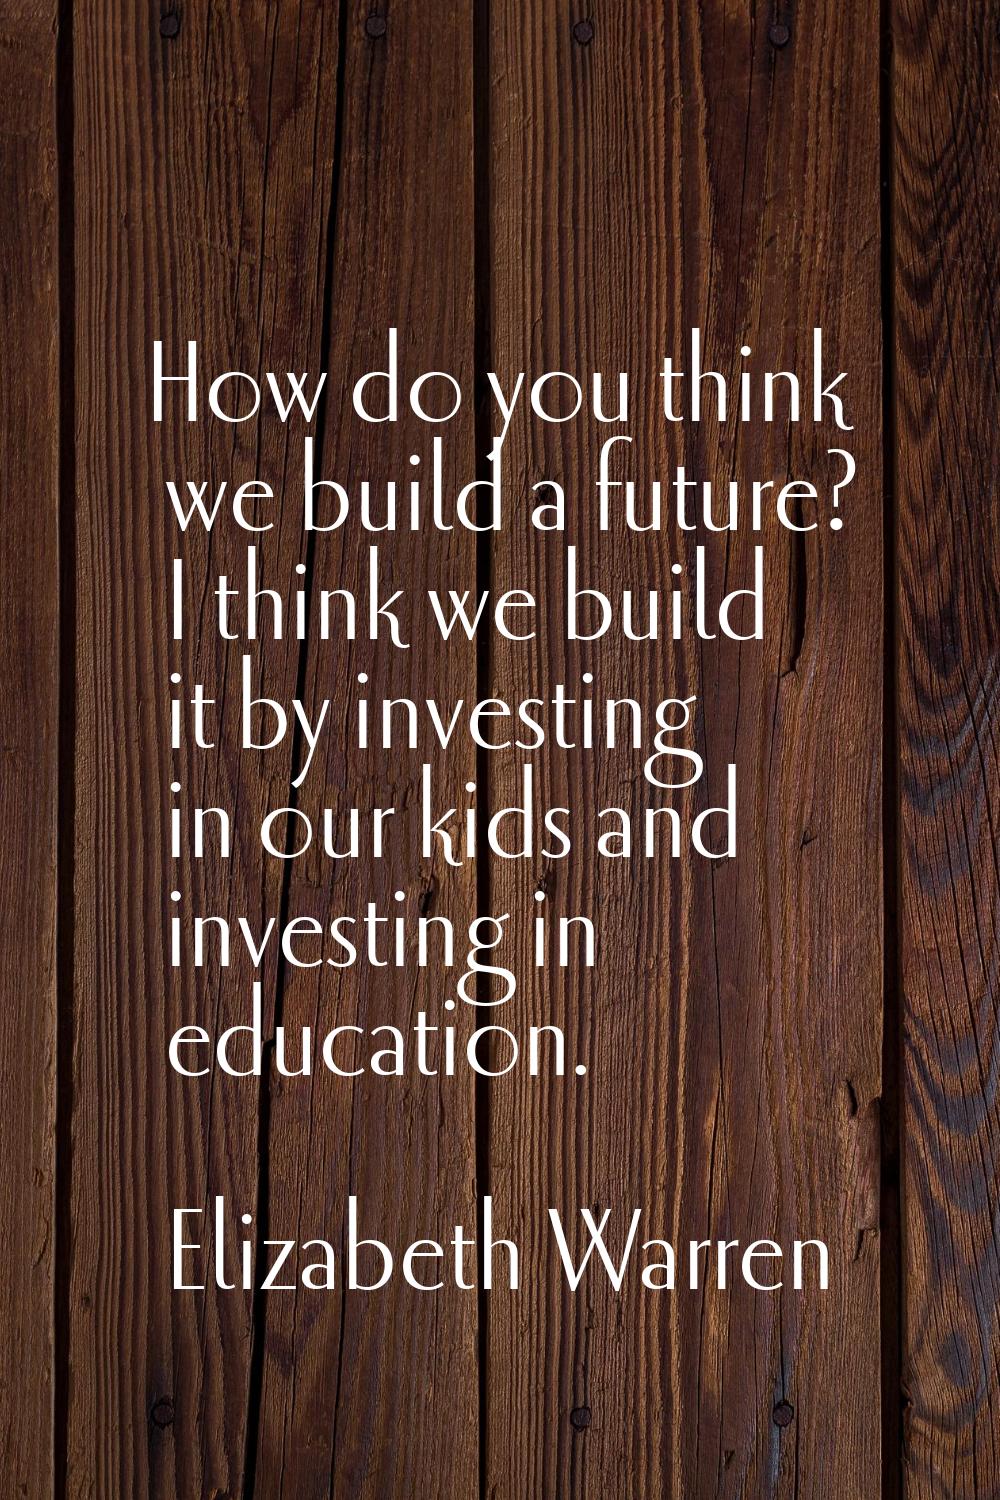 How do you think we build a future? I think we build it by investing in our kids and investing in e